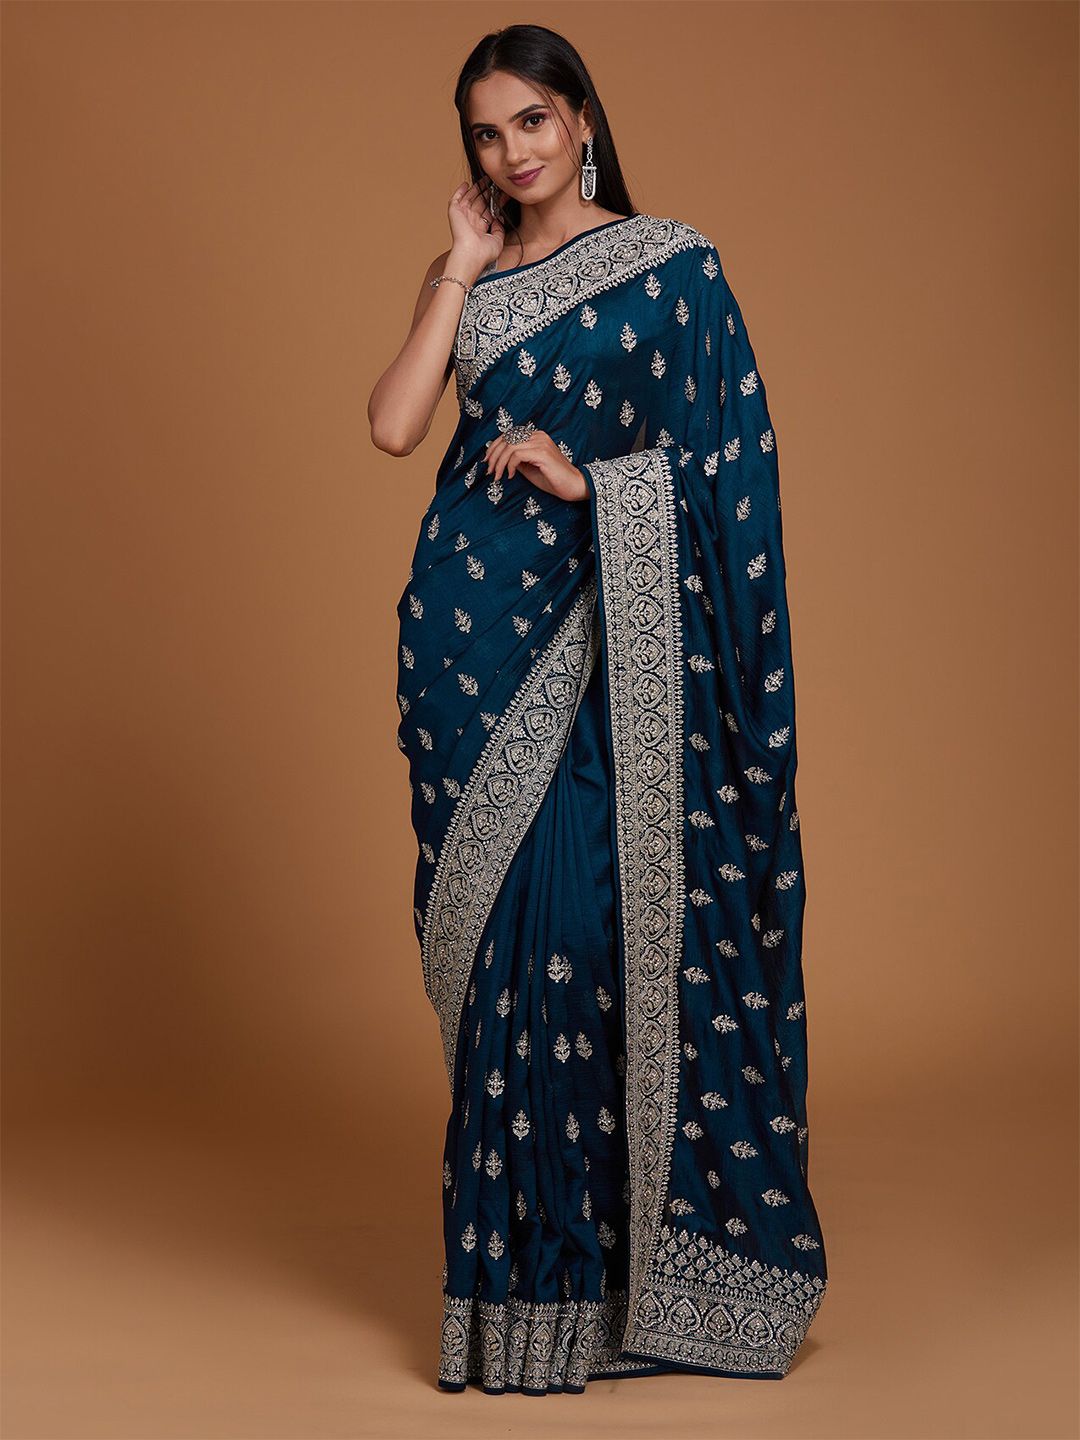 Koskii Blue & Silver-Toned Floral Embroidered Art Silk Saree Price in India